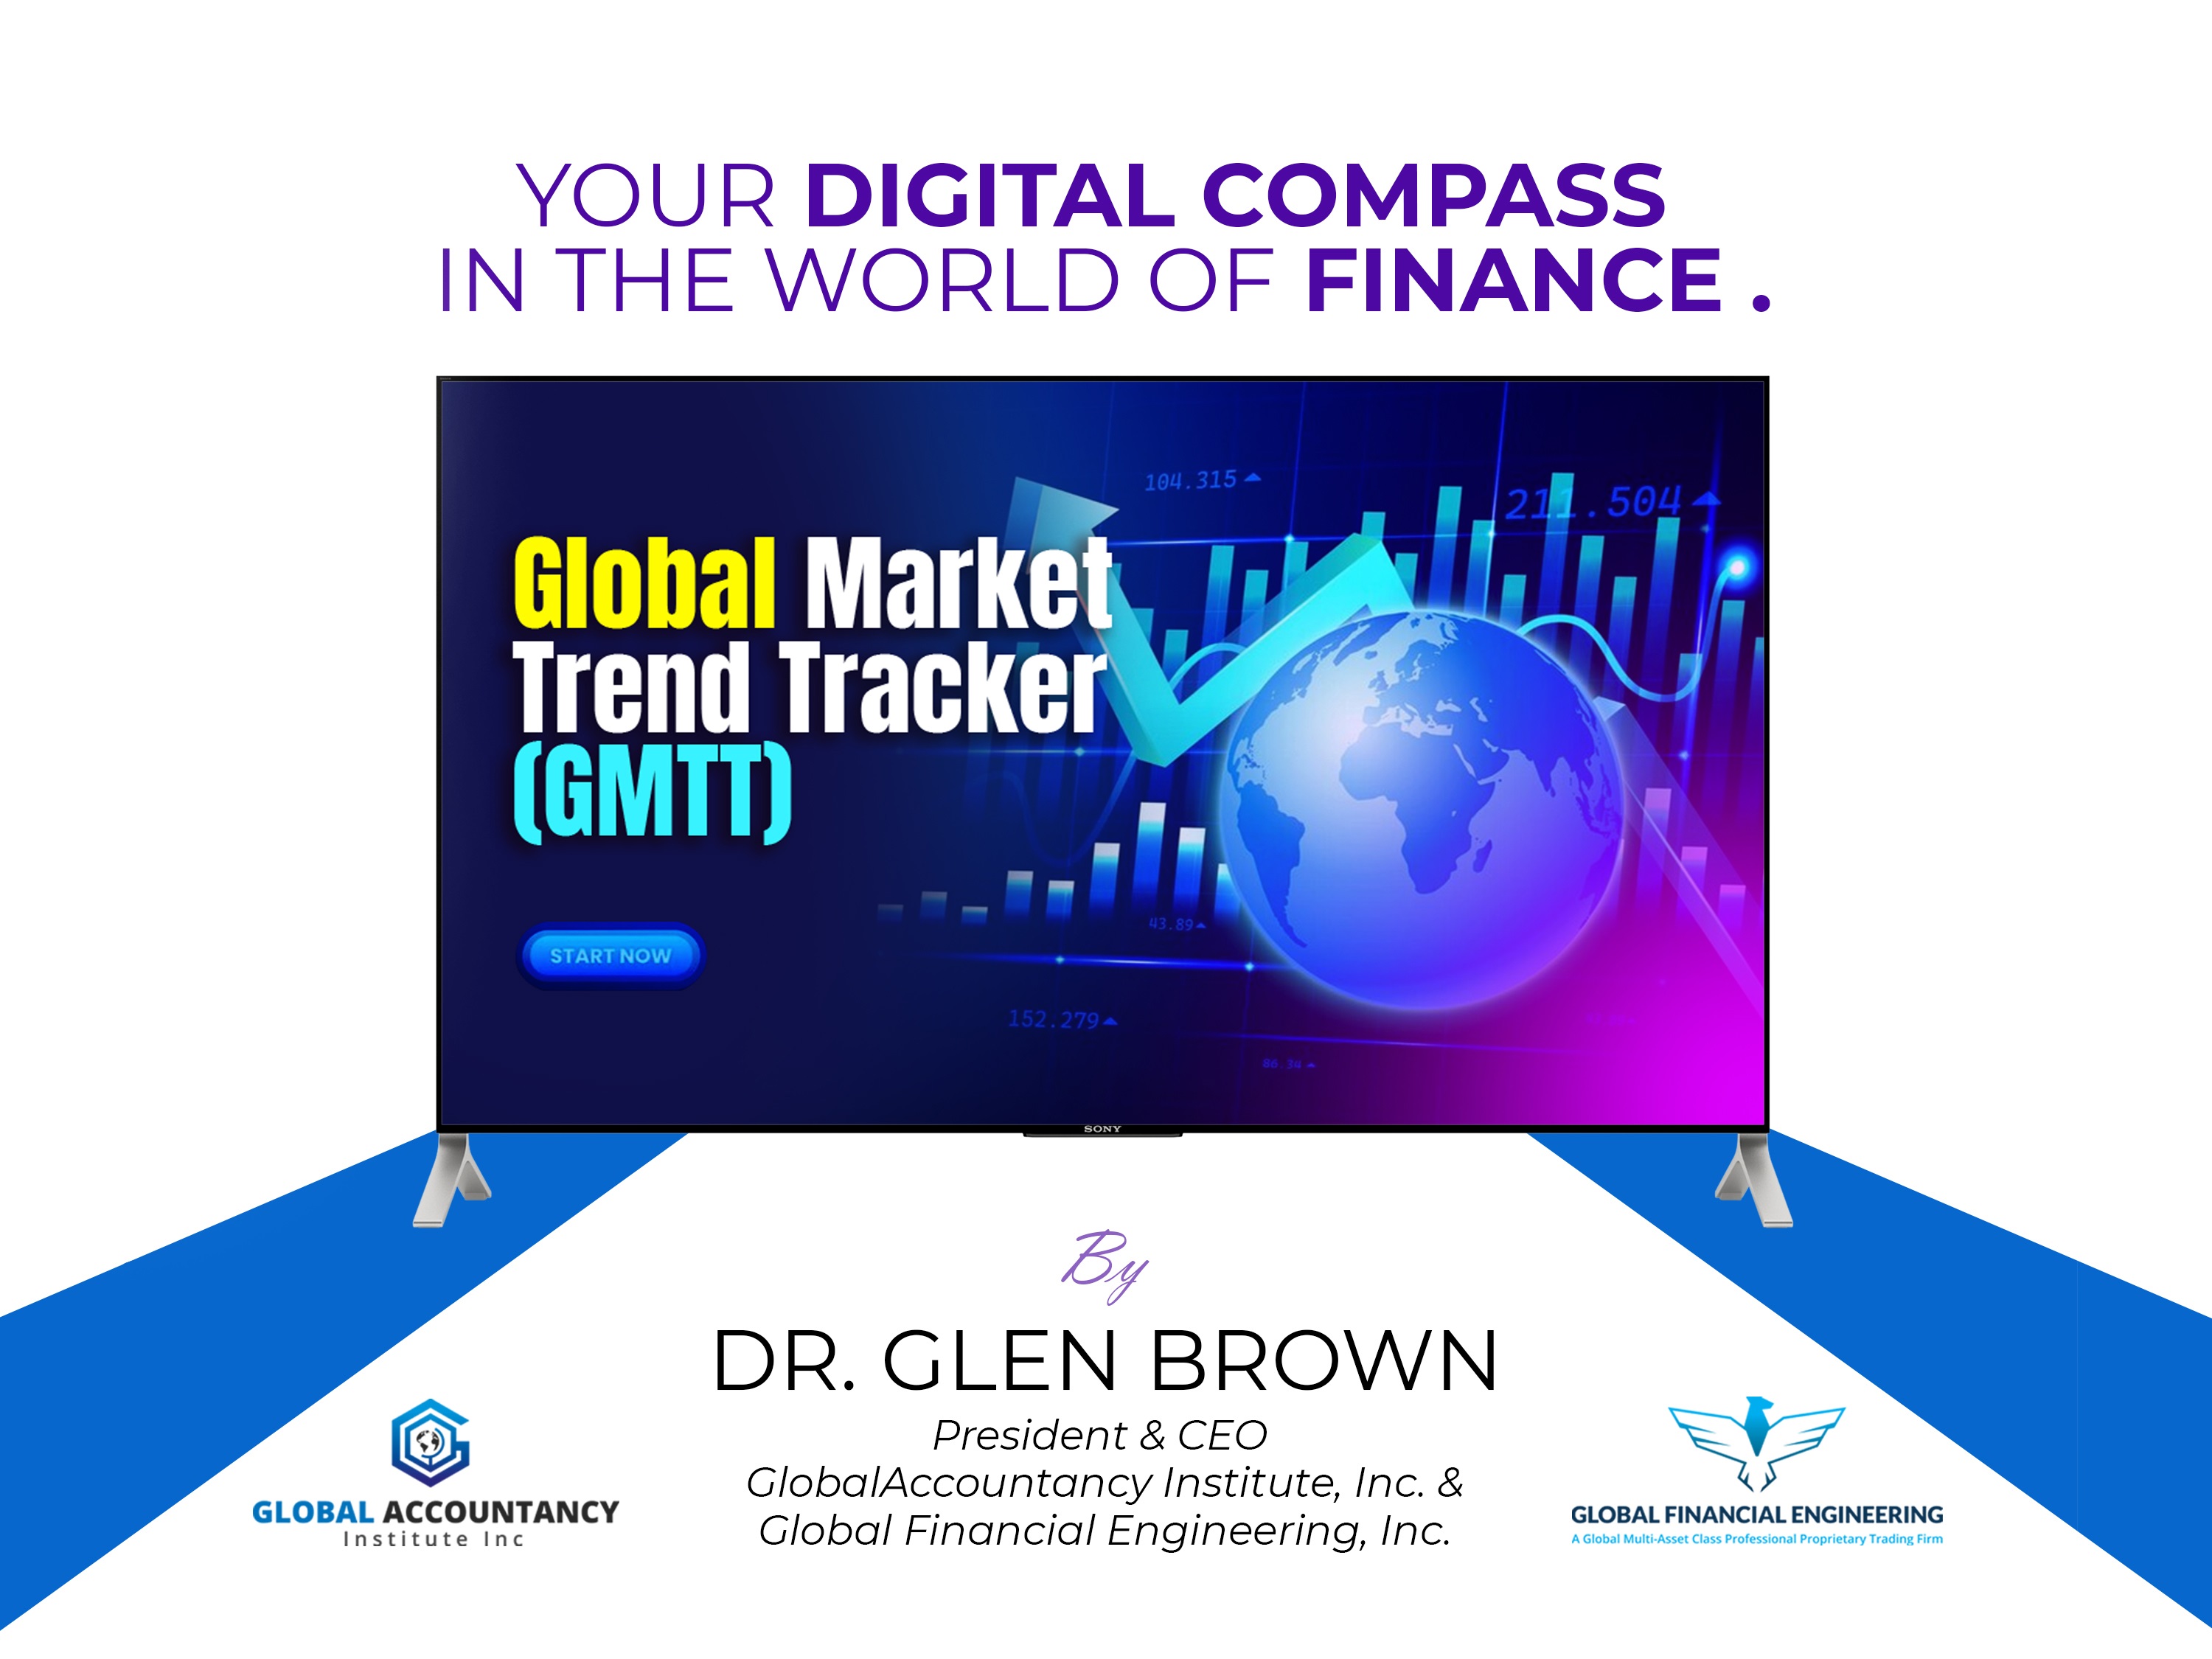 Global Market Trend Tracker (GMTT) - Your Digital Compass in the World of Finance